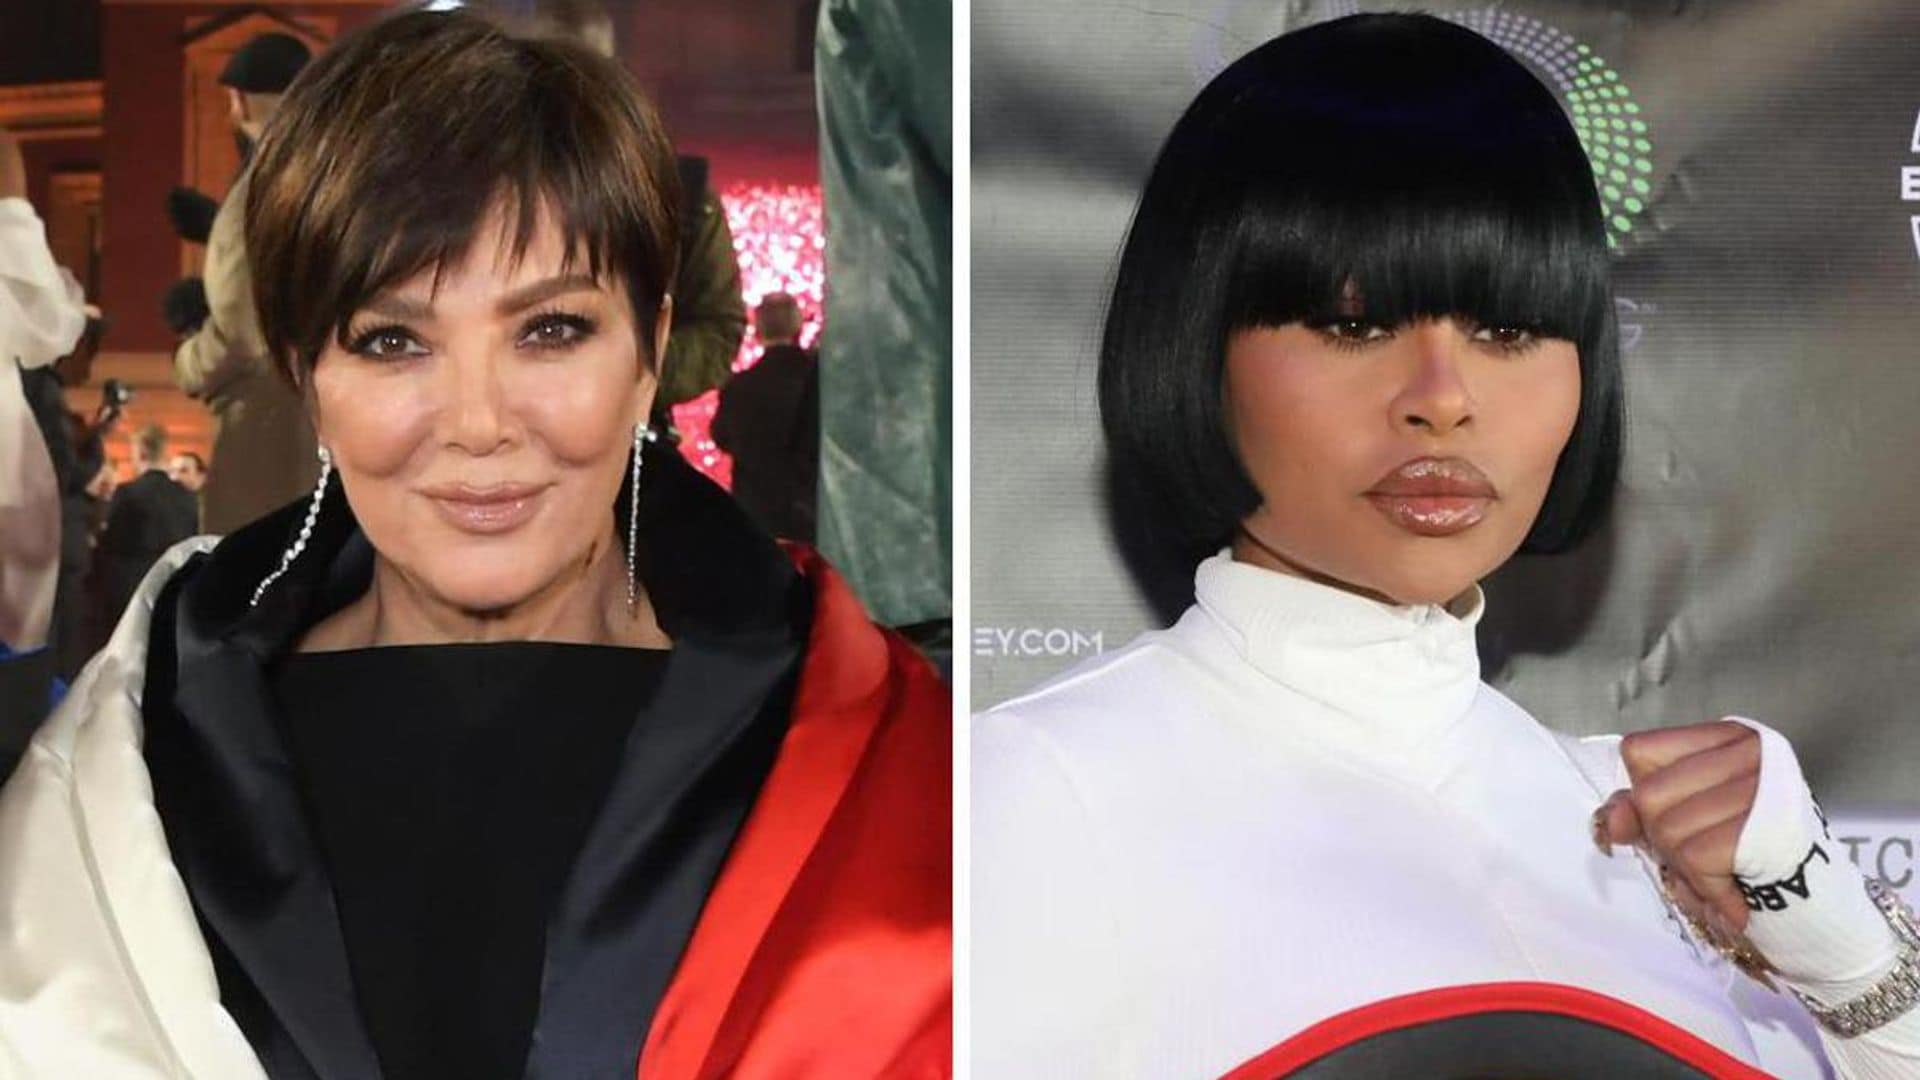 The Kardashian/Jenner clan is seeking close to $400,000 from Blac Chyna in legal fees